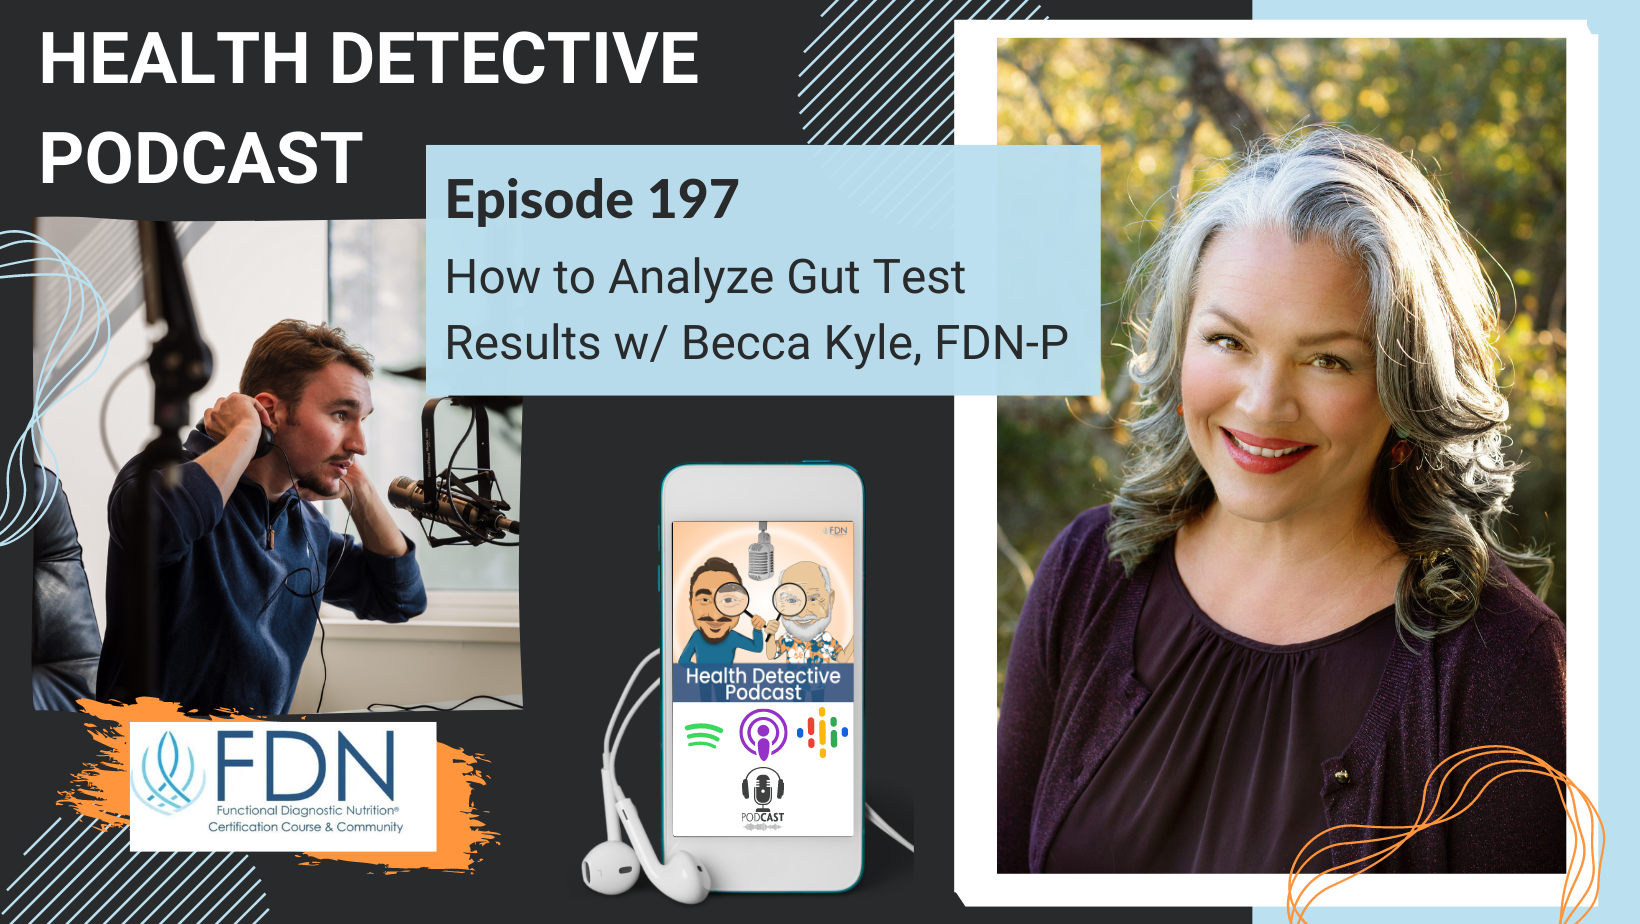 How to Analyze Gut Test Results w/ Becca Kyle, FDN-P How to Analyze Gut Test Results with Becca Kyle FDNP